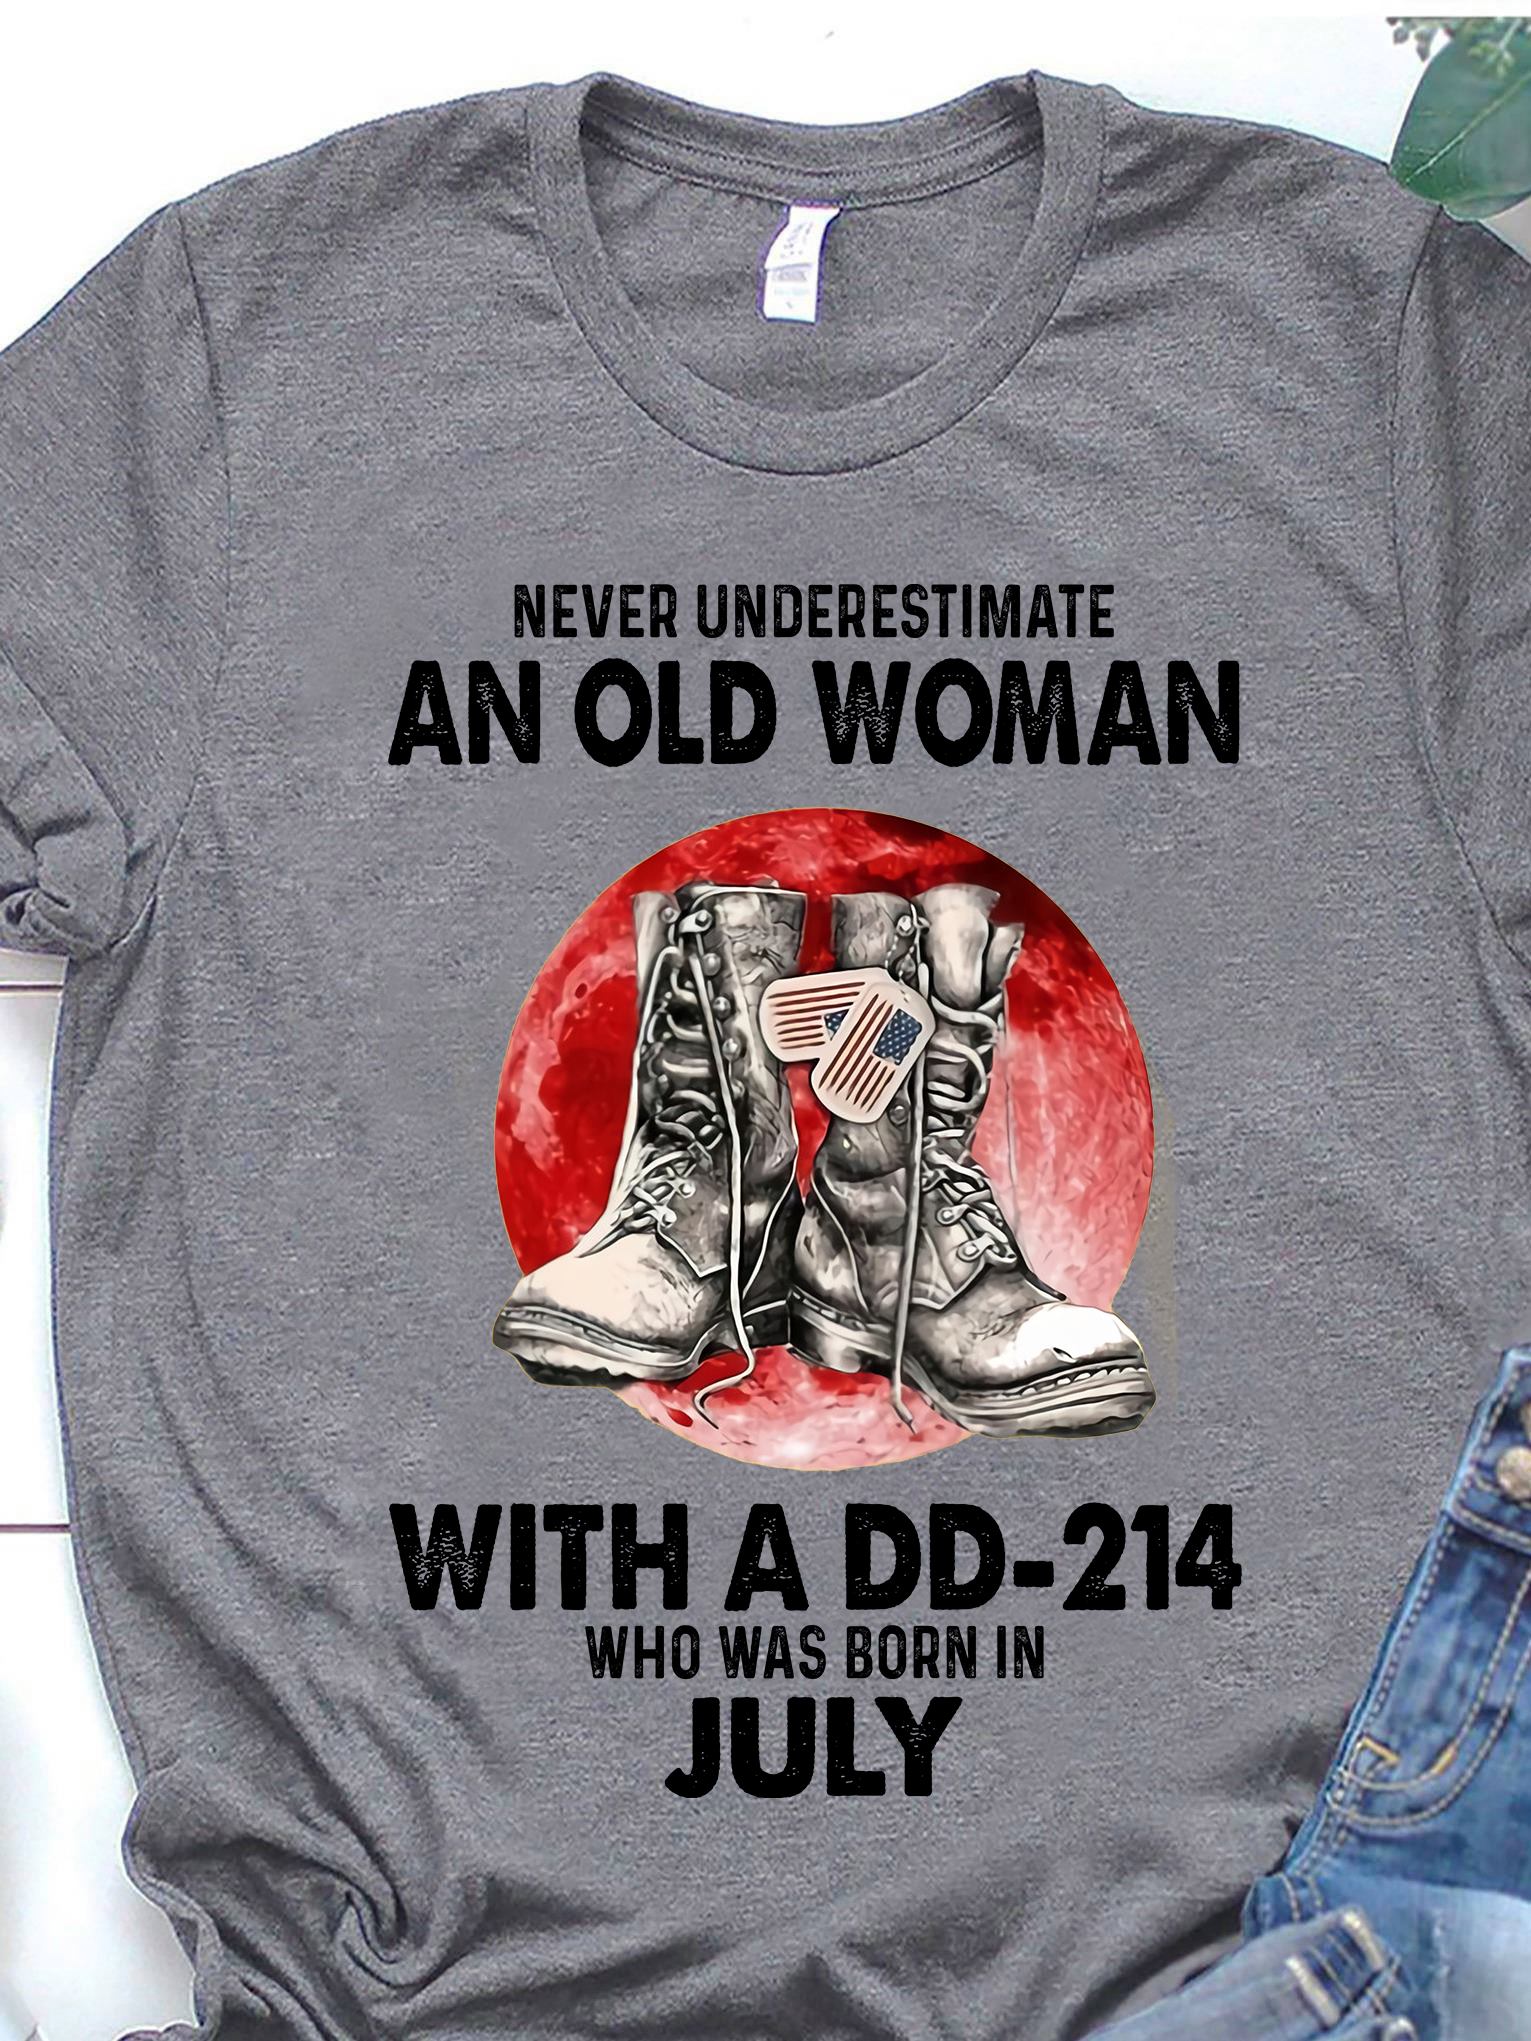 Never underestimate an old woman with a DD-214 who was born in July - Pair of shoes